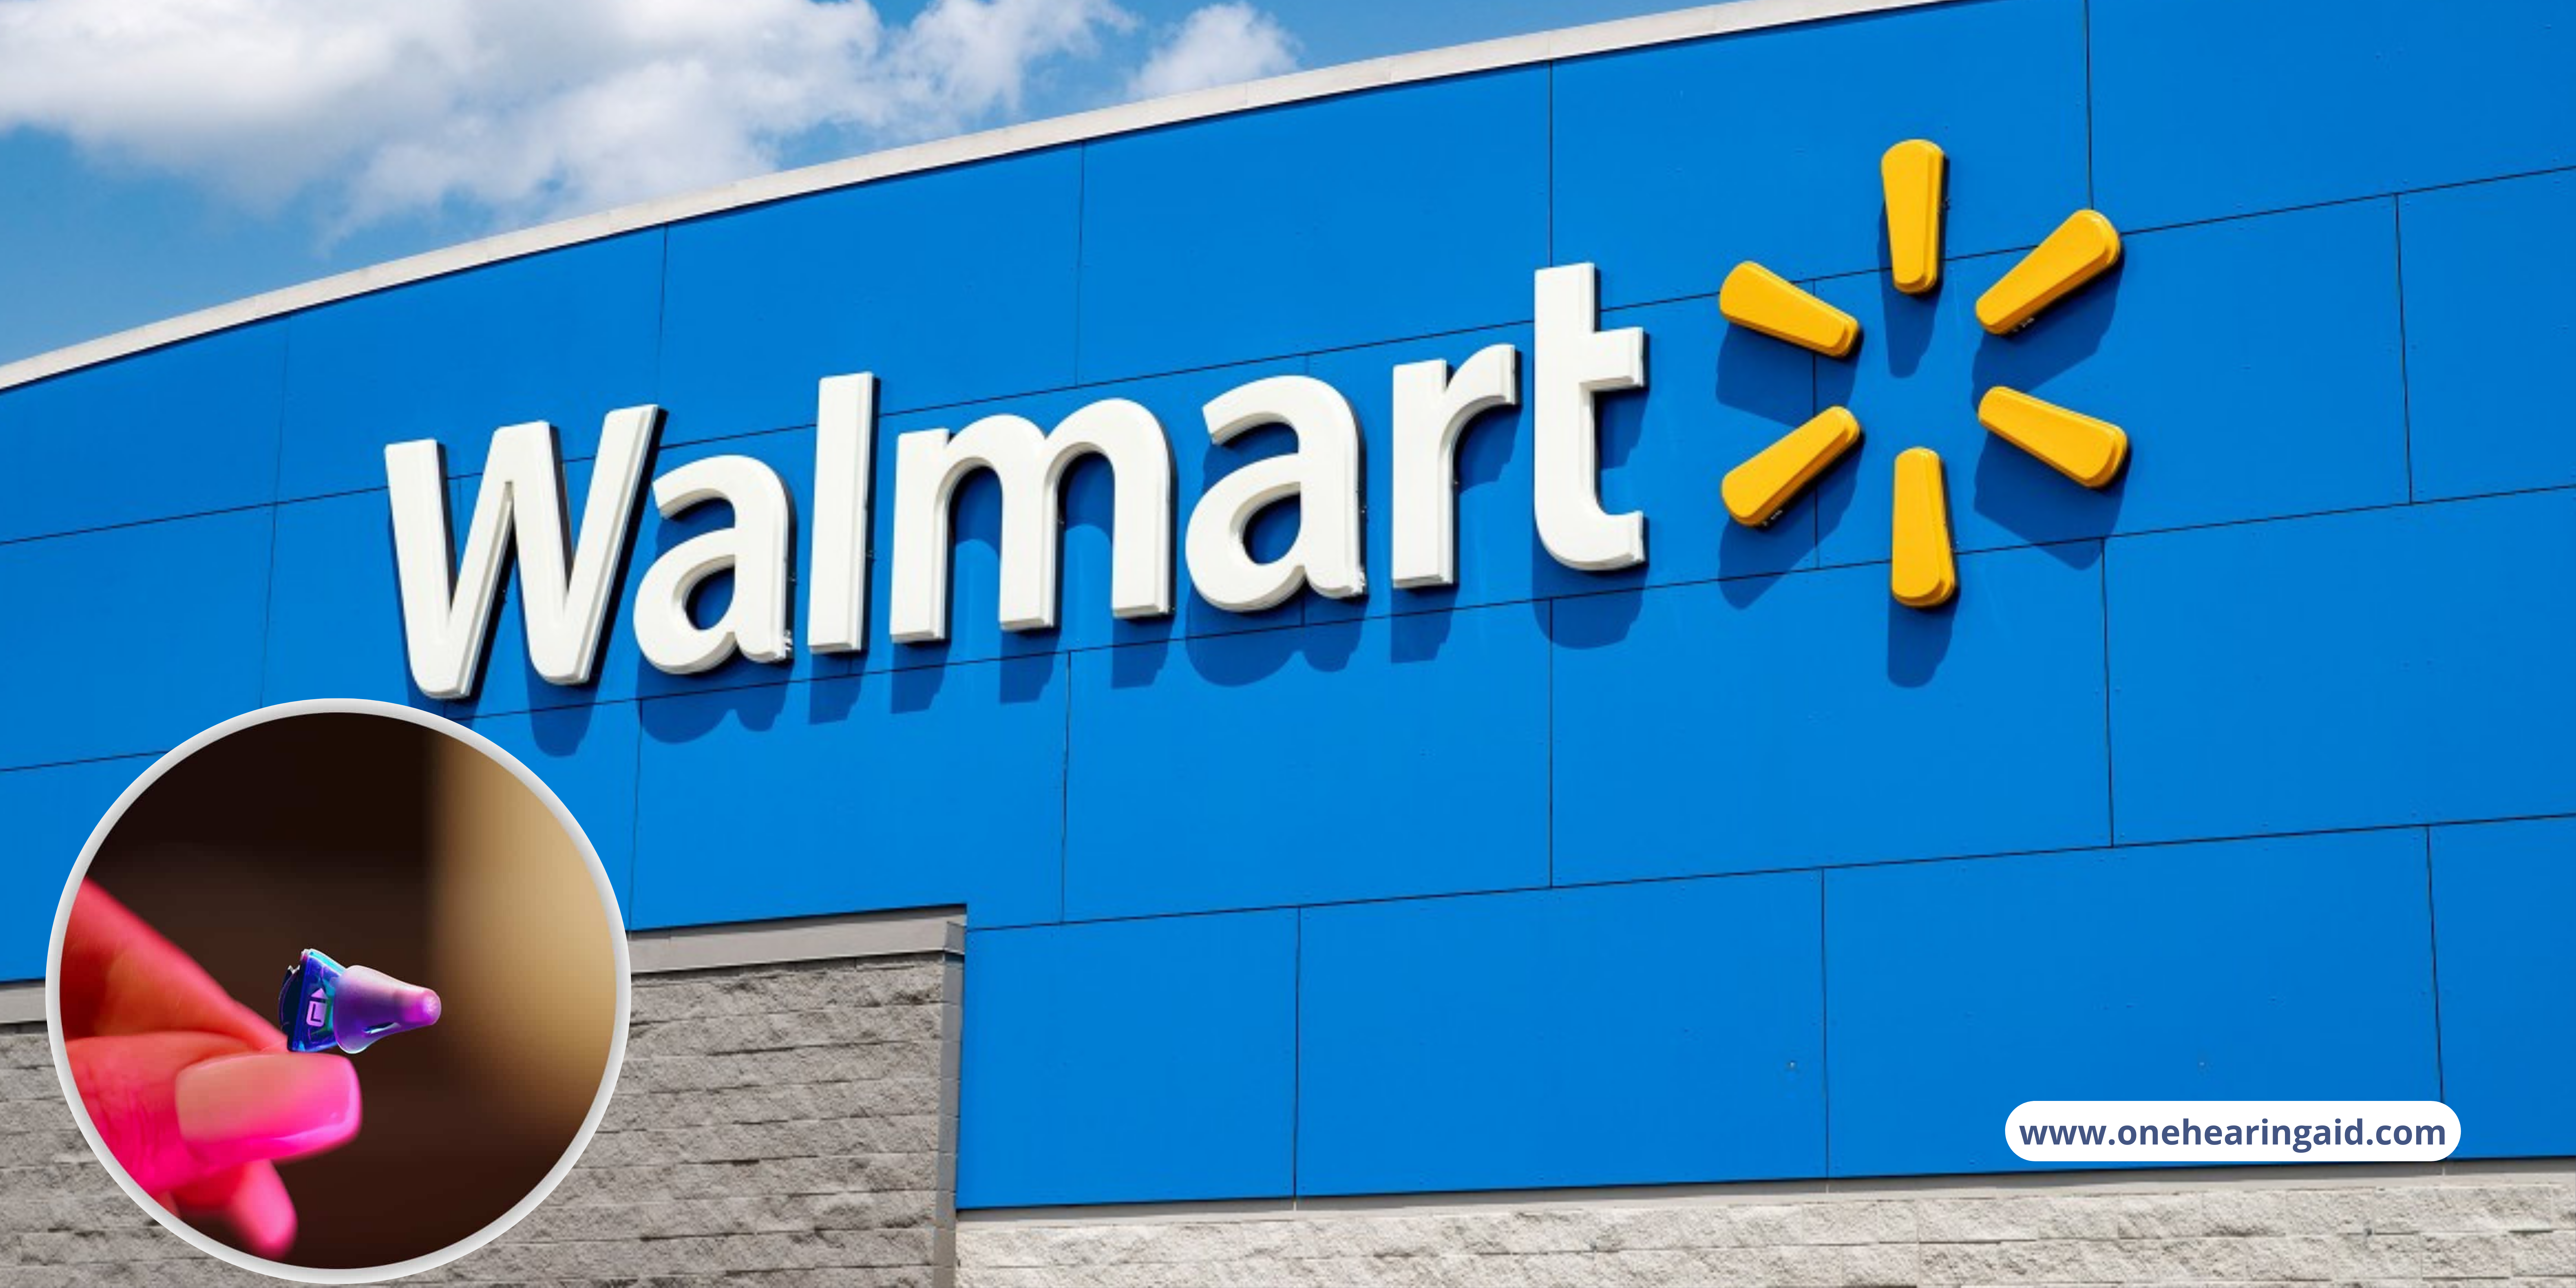 Despite the fact that there are over 3,500 Walmart Supercenters in the United States, Walmart Health is still a small company with only 32 facilities in Arkansas, Georgia, Illinois, and Texas. However, Walmart intends to increase this number to over 80 centres across seven states by the end of 2024.